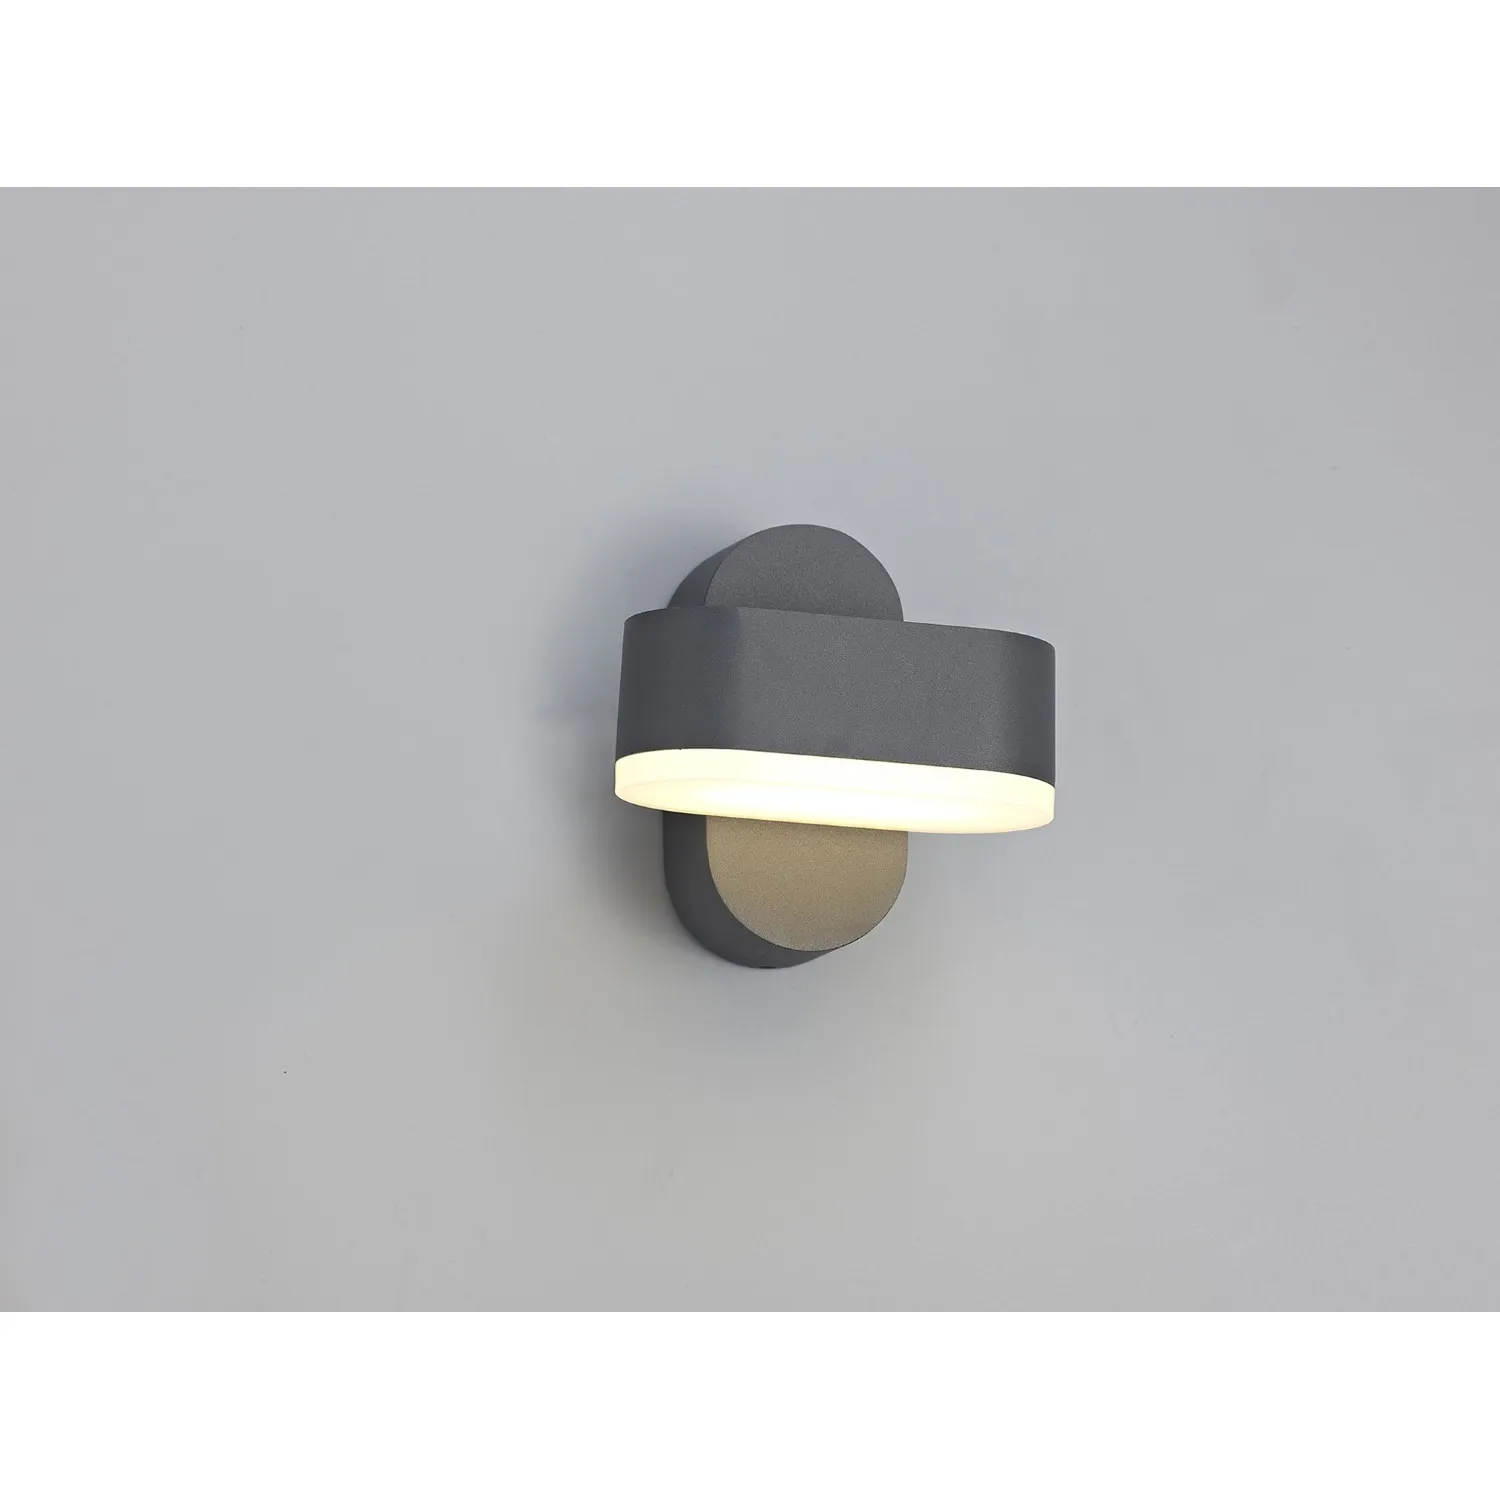 South Bank 1 Light Adjustable Wall Lamp, 1 x 6W LED, 3000K, 400lm, IP54, Anthracite, 3yrs Warranty